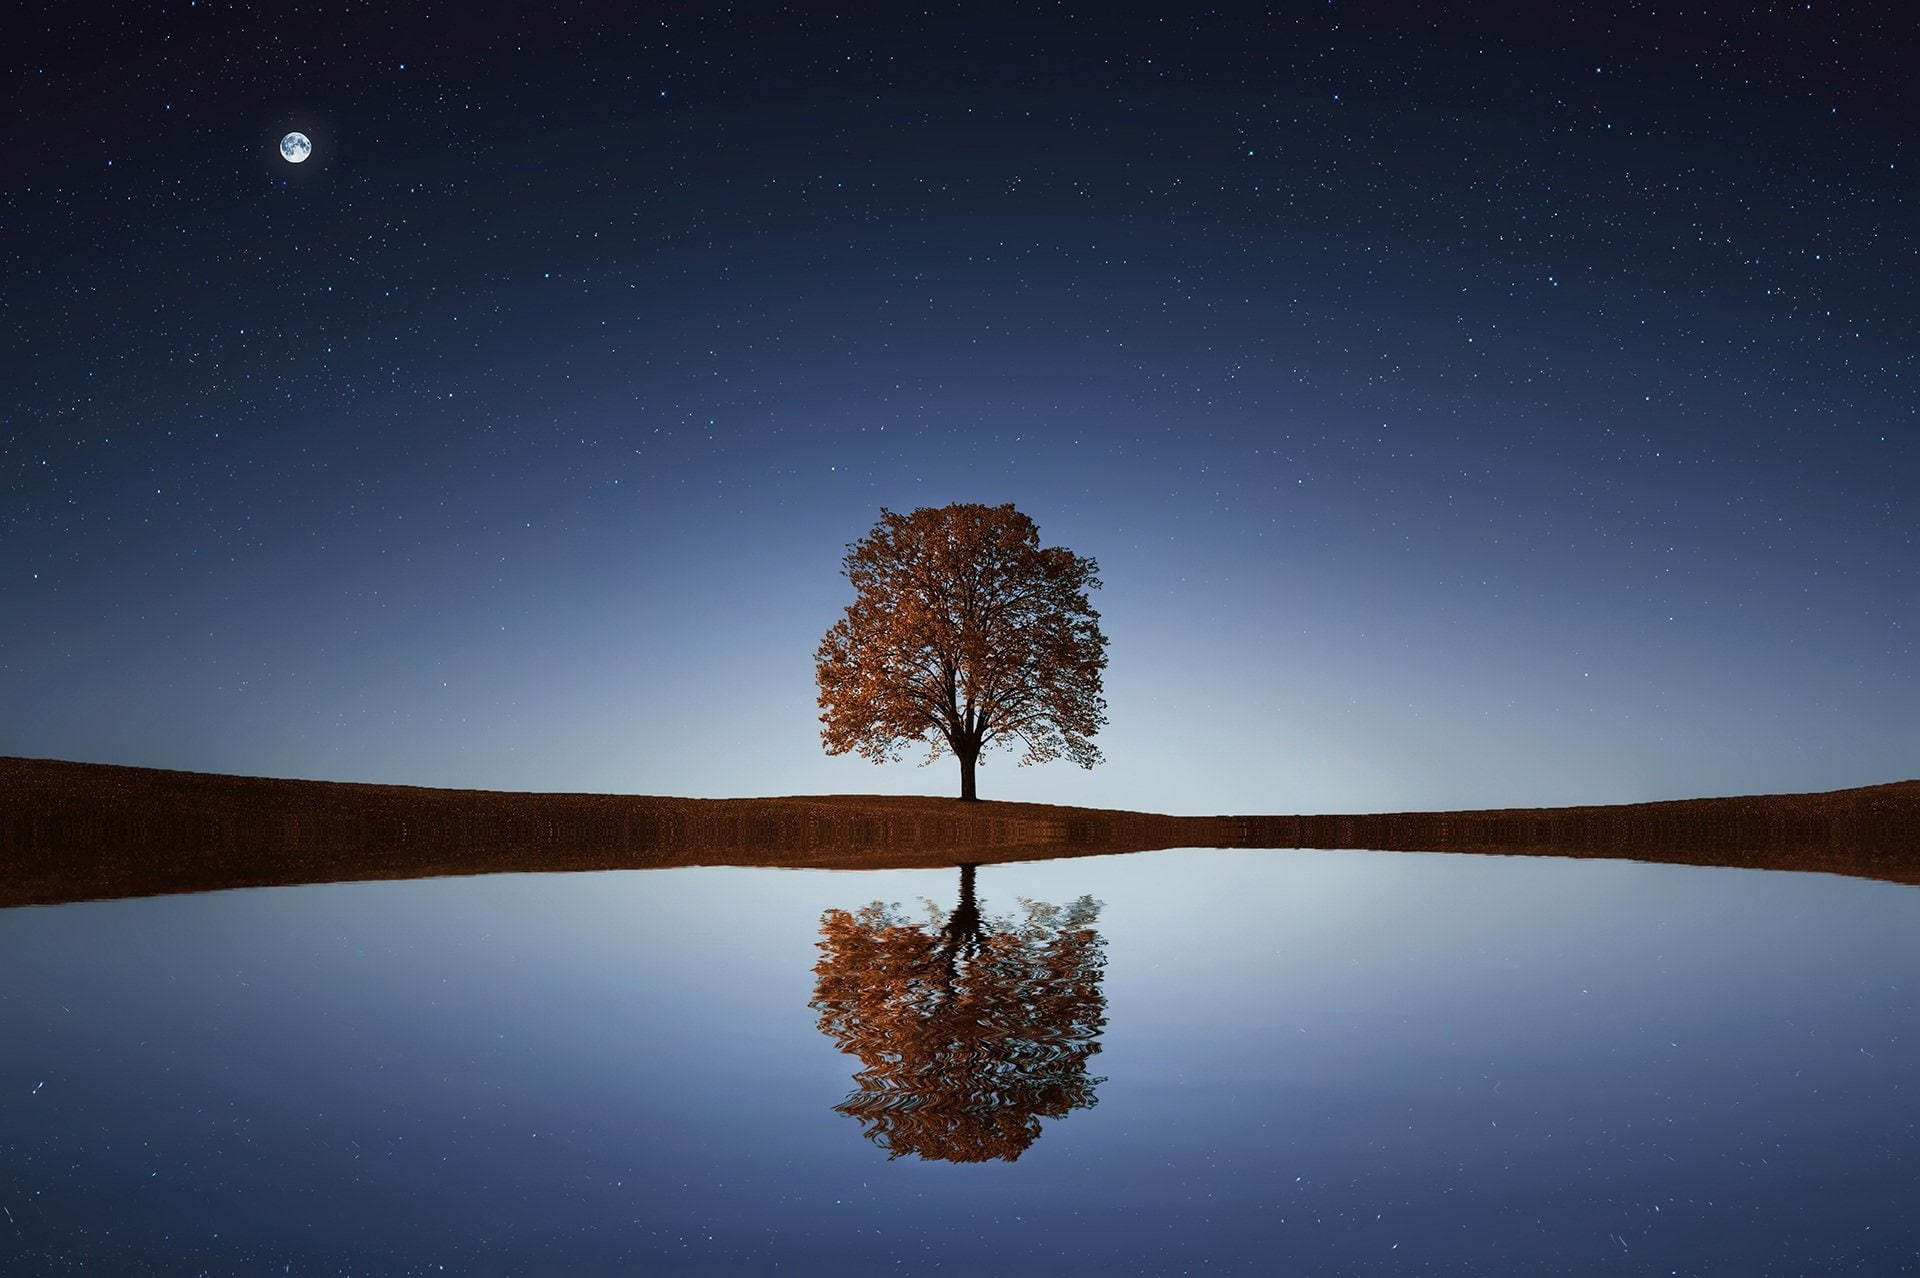 Trees, Artistic, Blue, Earth, Lonely Tree, Moon, Nature, Reflection